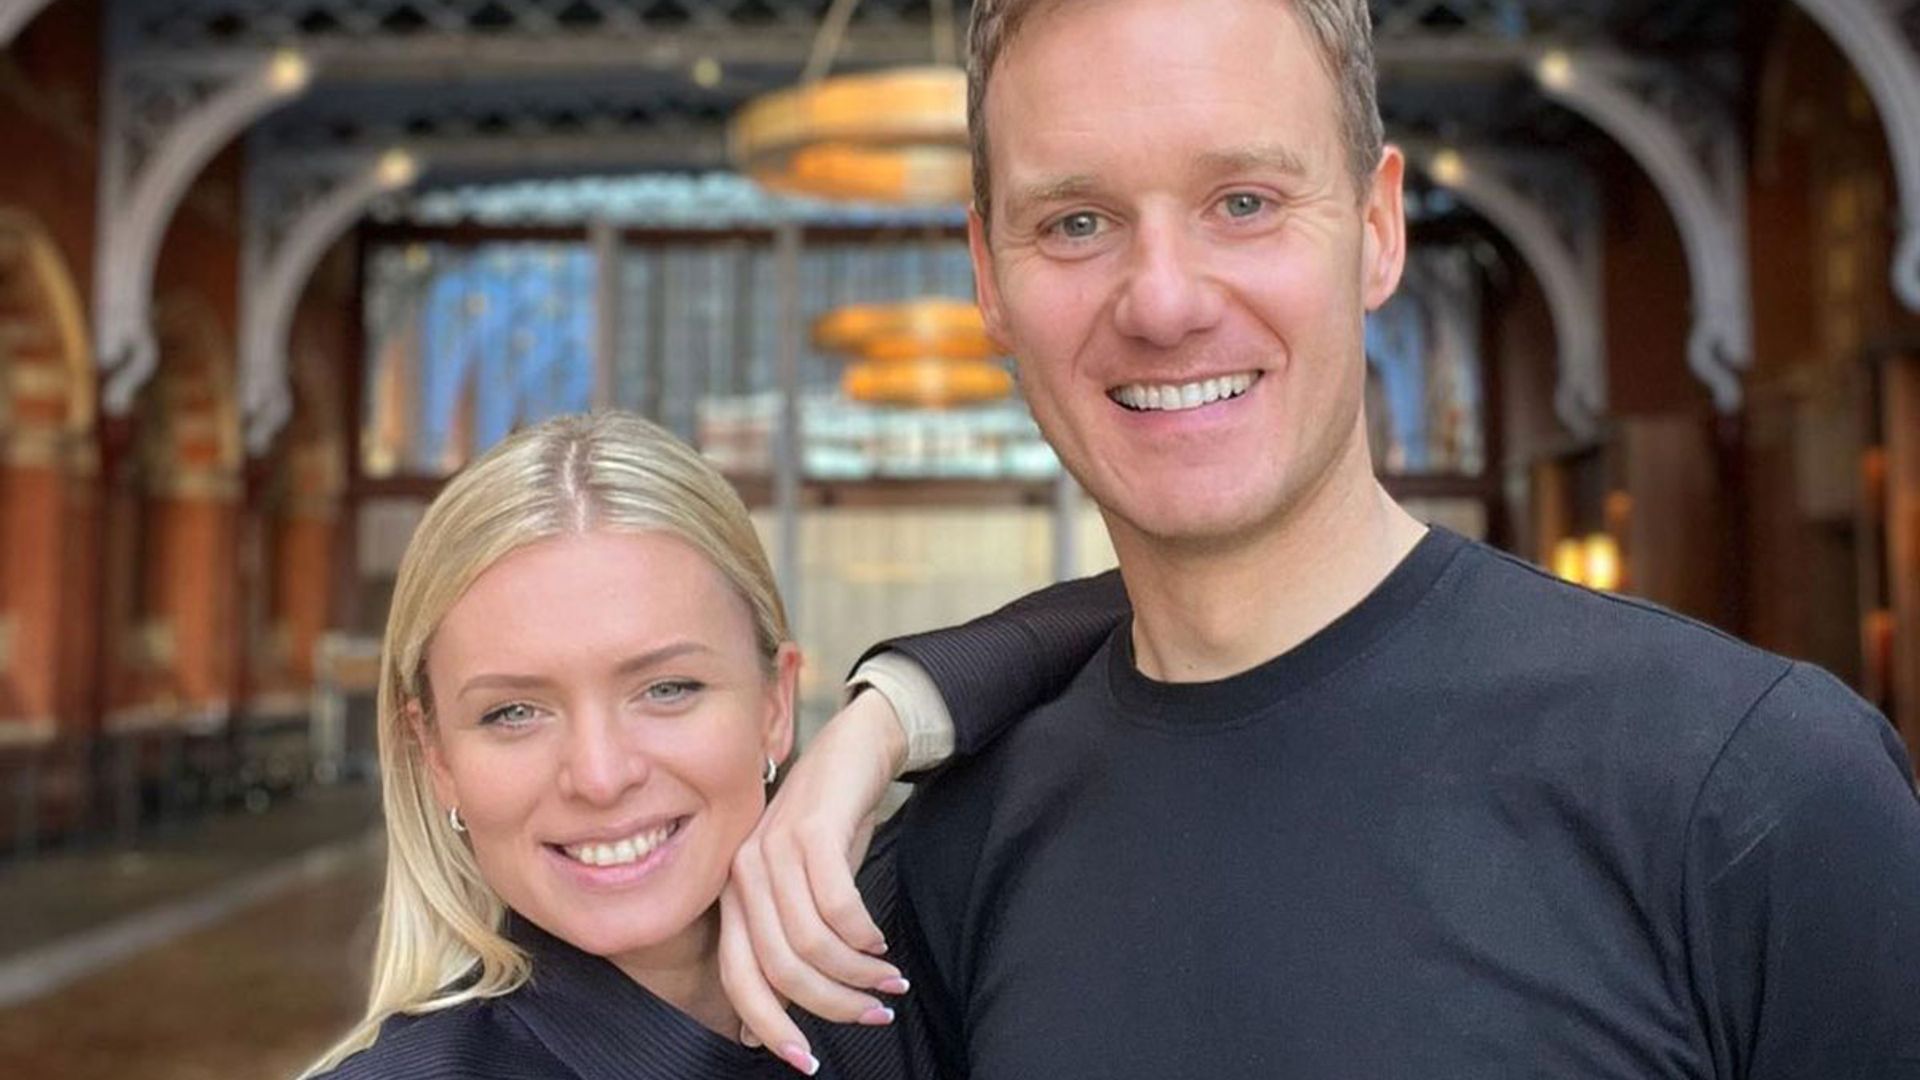 Dan Walker reacts to Nadiya Bychkova's reunion with Kai Widdrington as they perform together for special reason